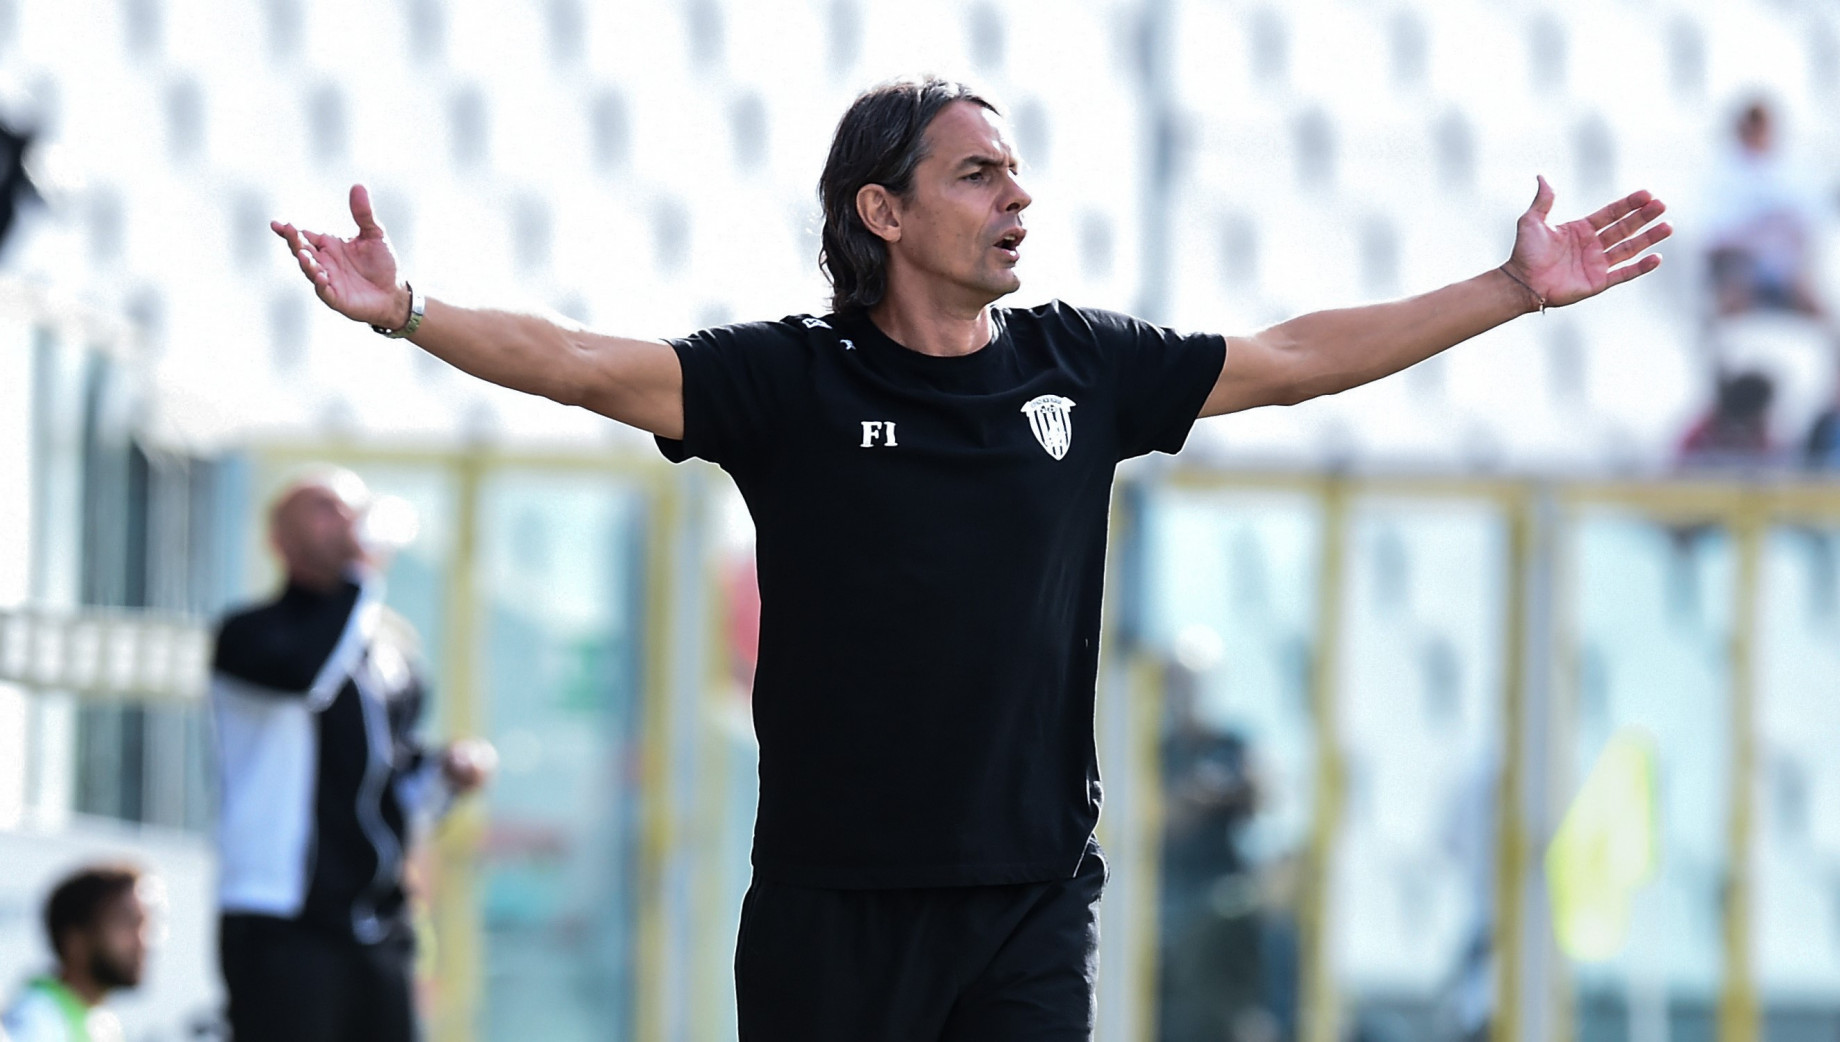 Inzaghi Benevento IMAGE